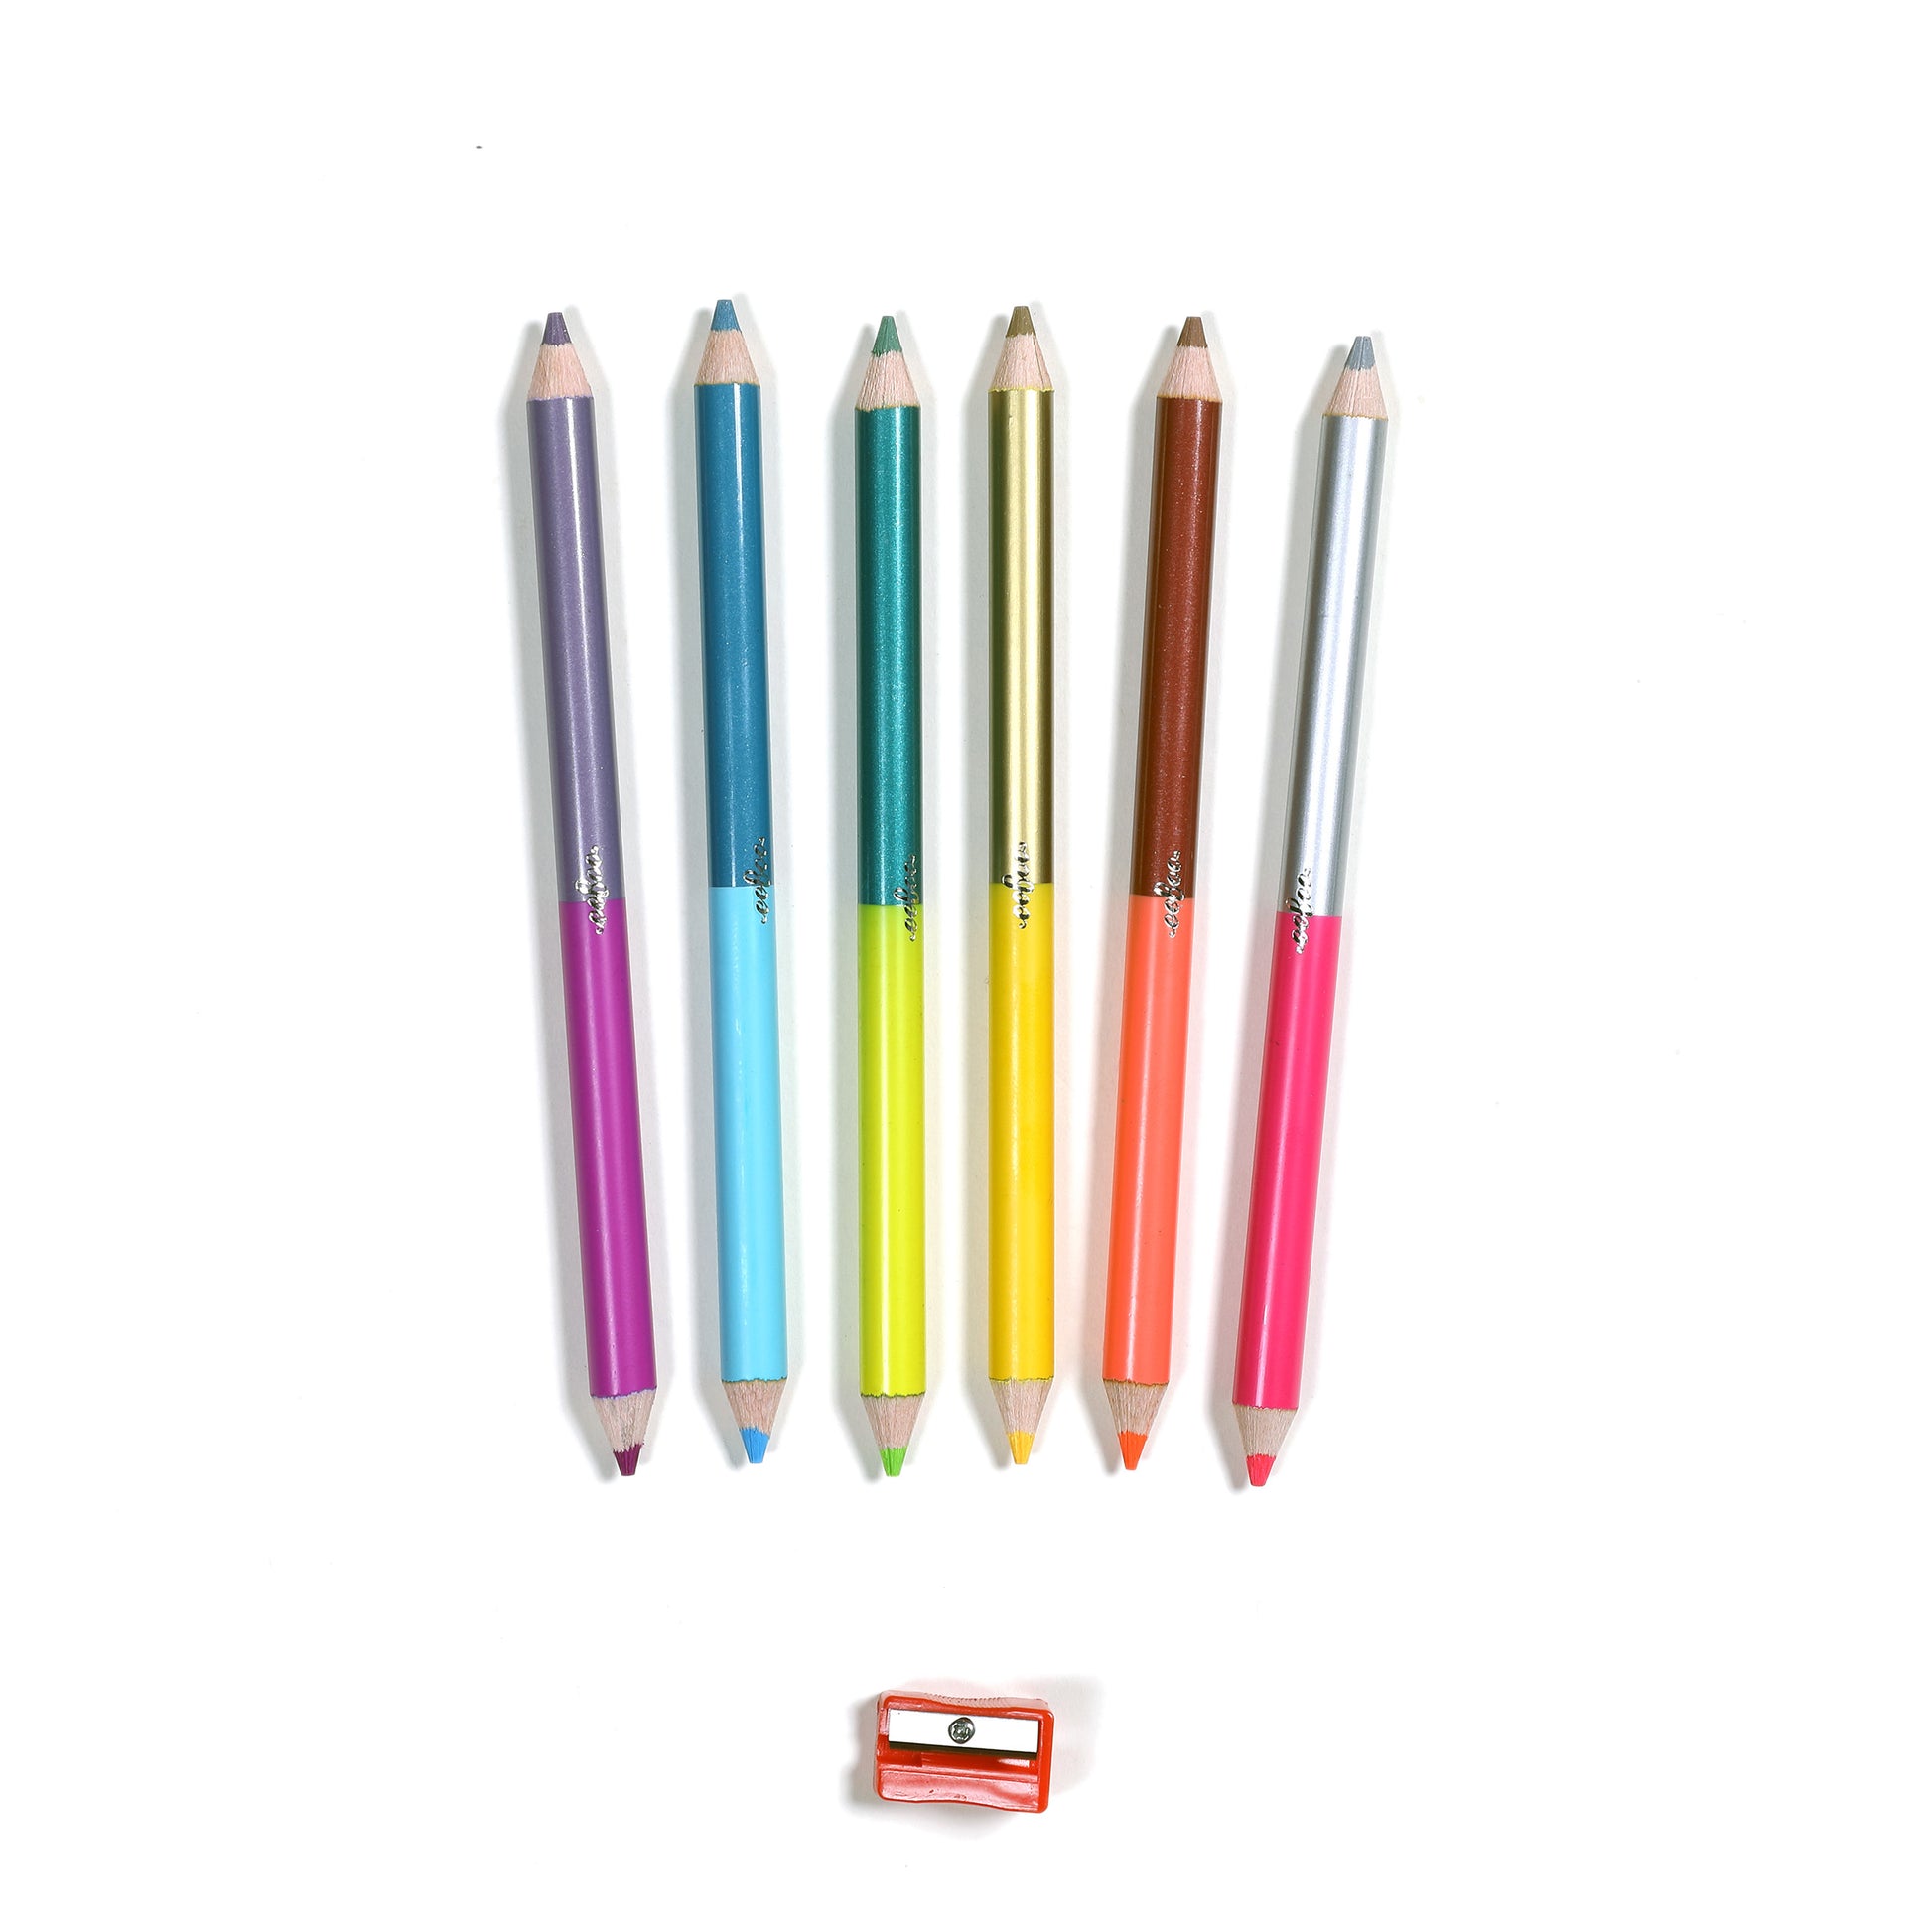 eeBoo 100 Colors 50 Double-Sided Pencils